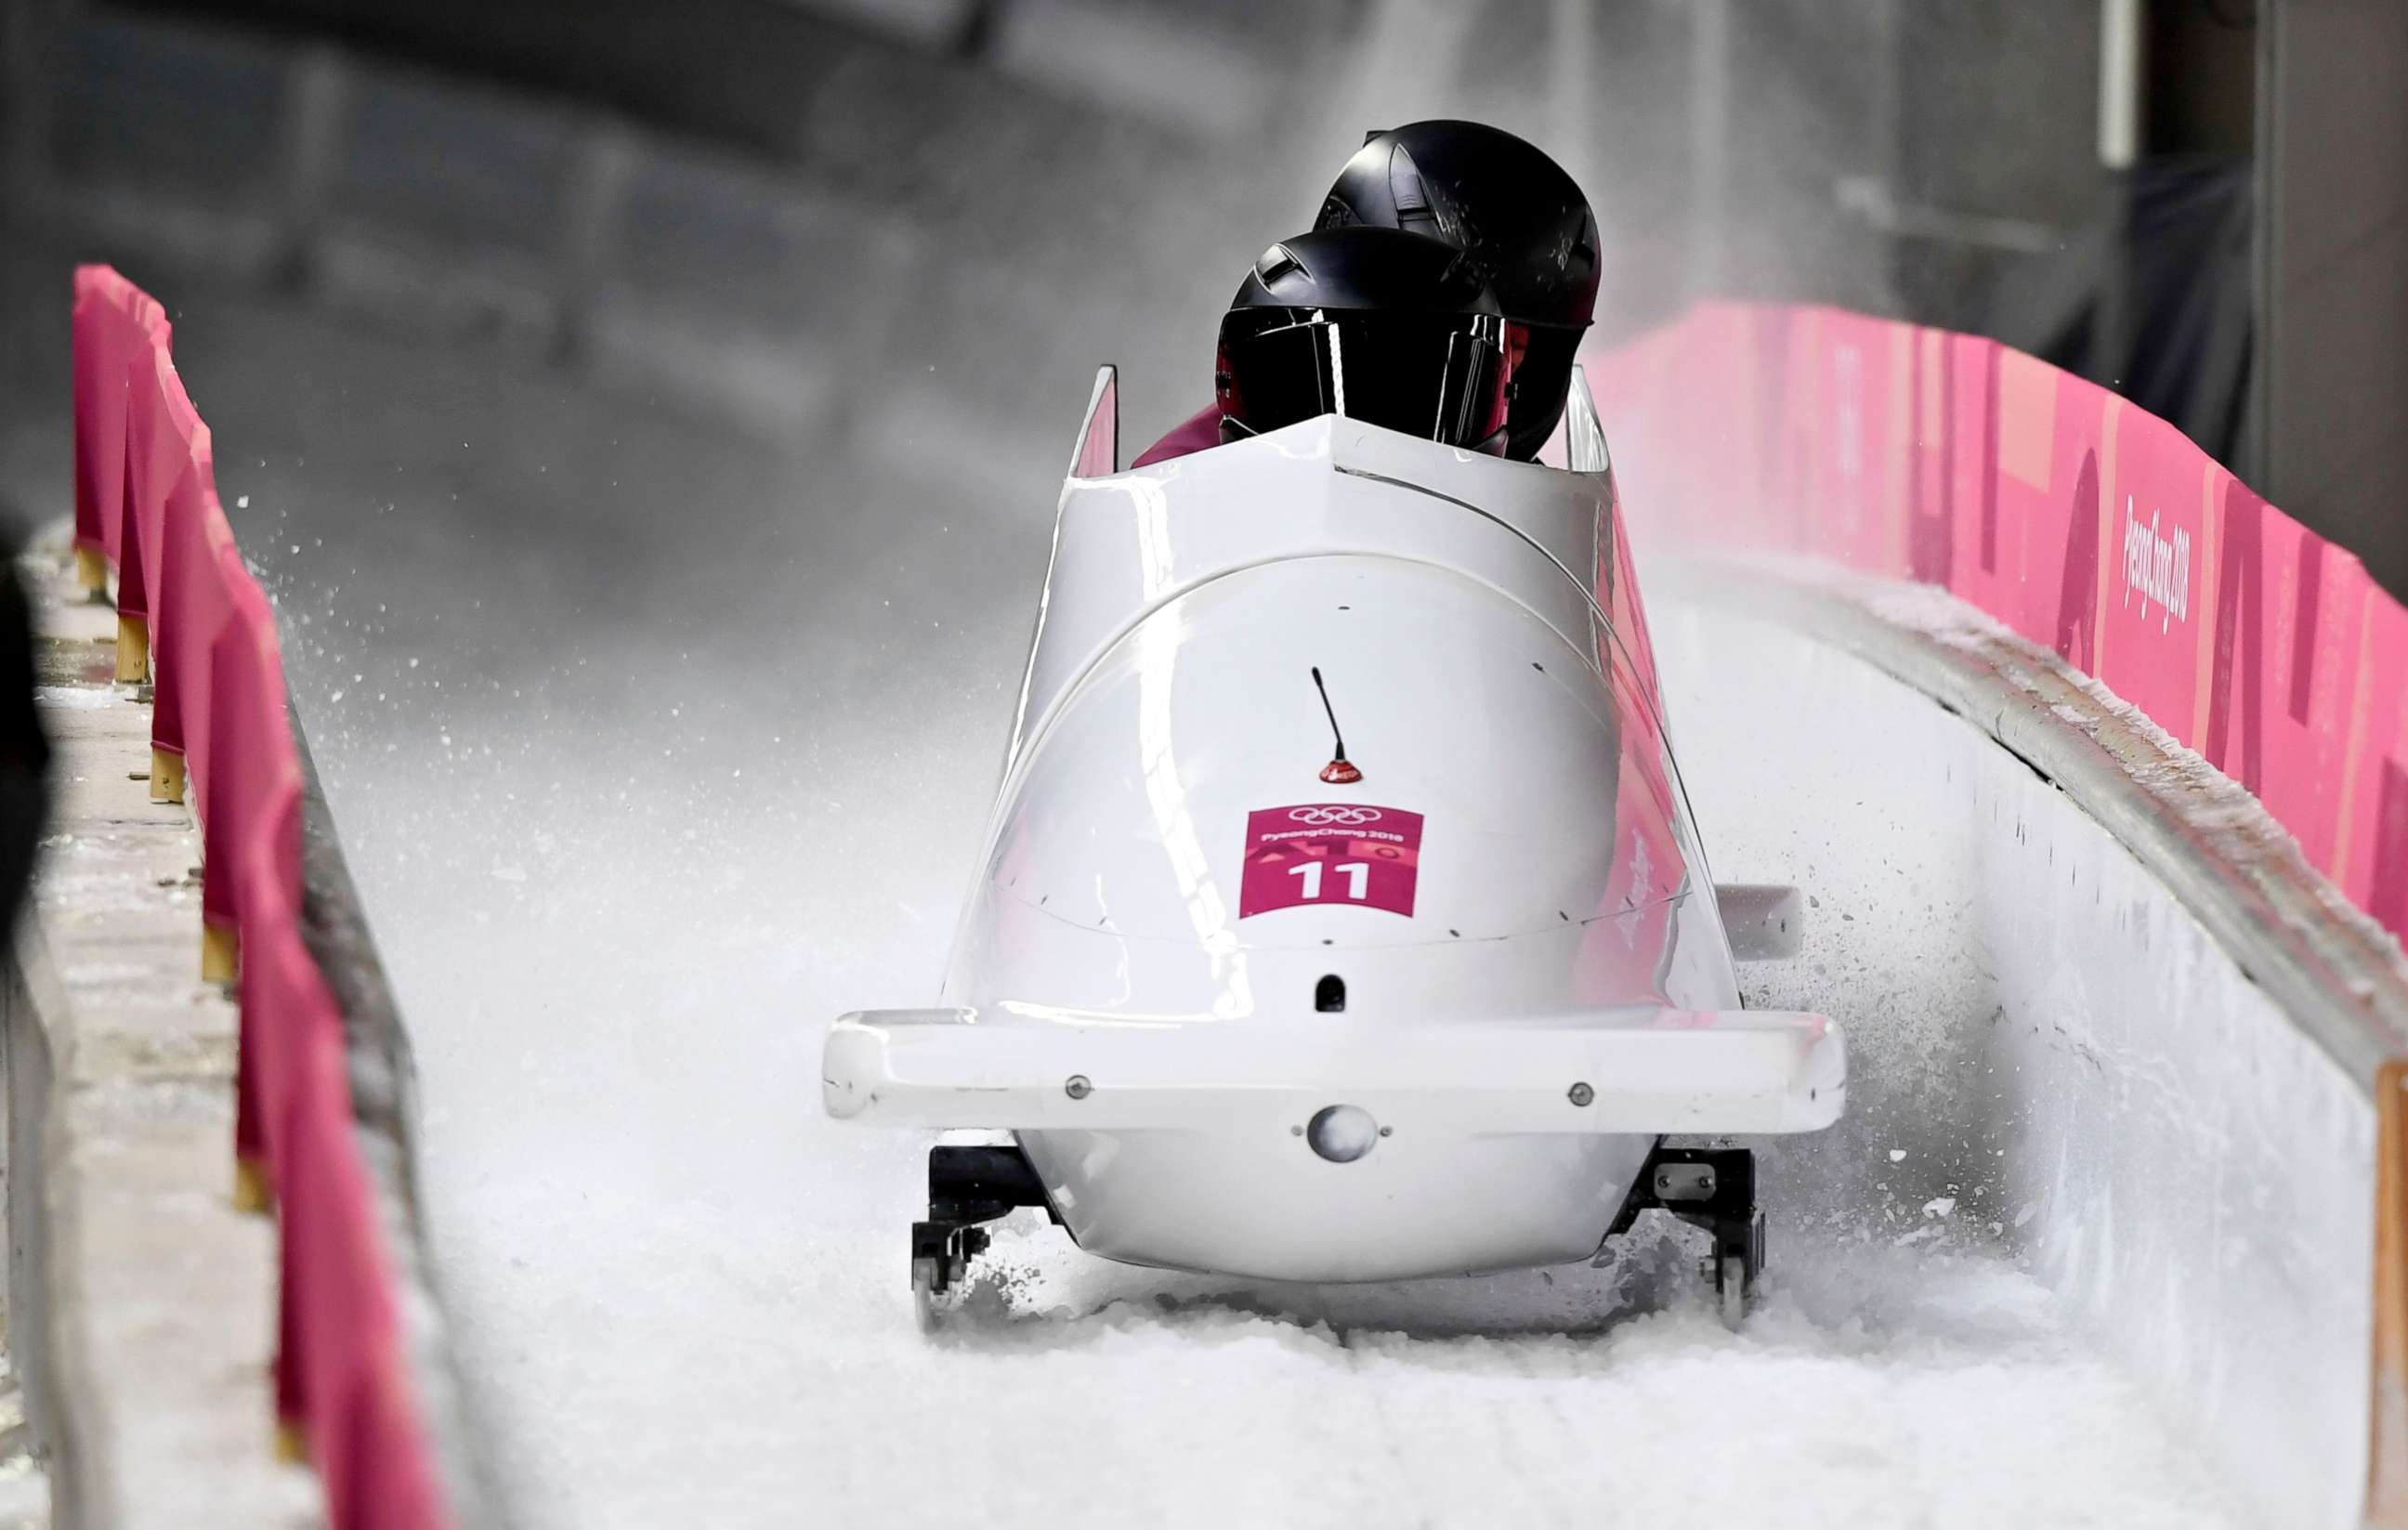 PHOTO: Nadezhda Sergeeva (front) and Anastasia Kocherzhova of the Olympic Athlete from Russia in action during the Women's Bobsleigh Heats at the Olympic Sliding Centre during the PyeongChang 2018 Olympic Games, South Korea, Feb. 21, 2018.